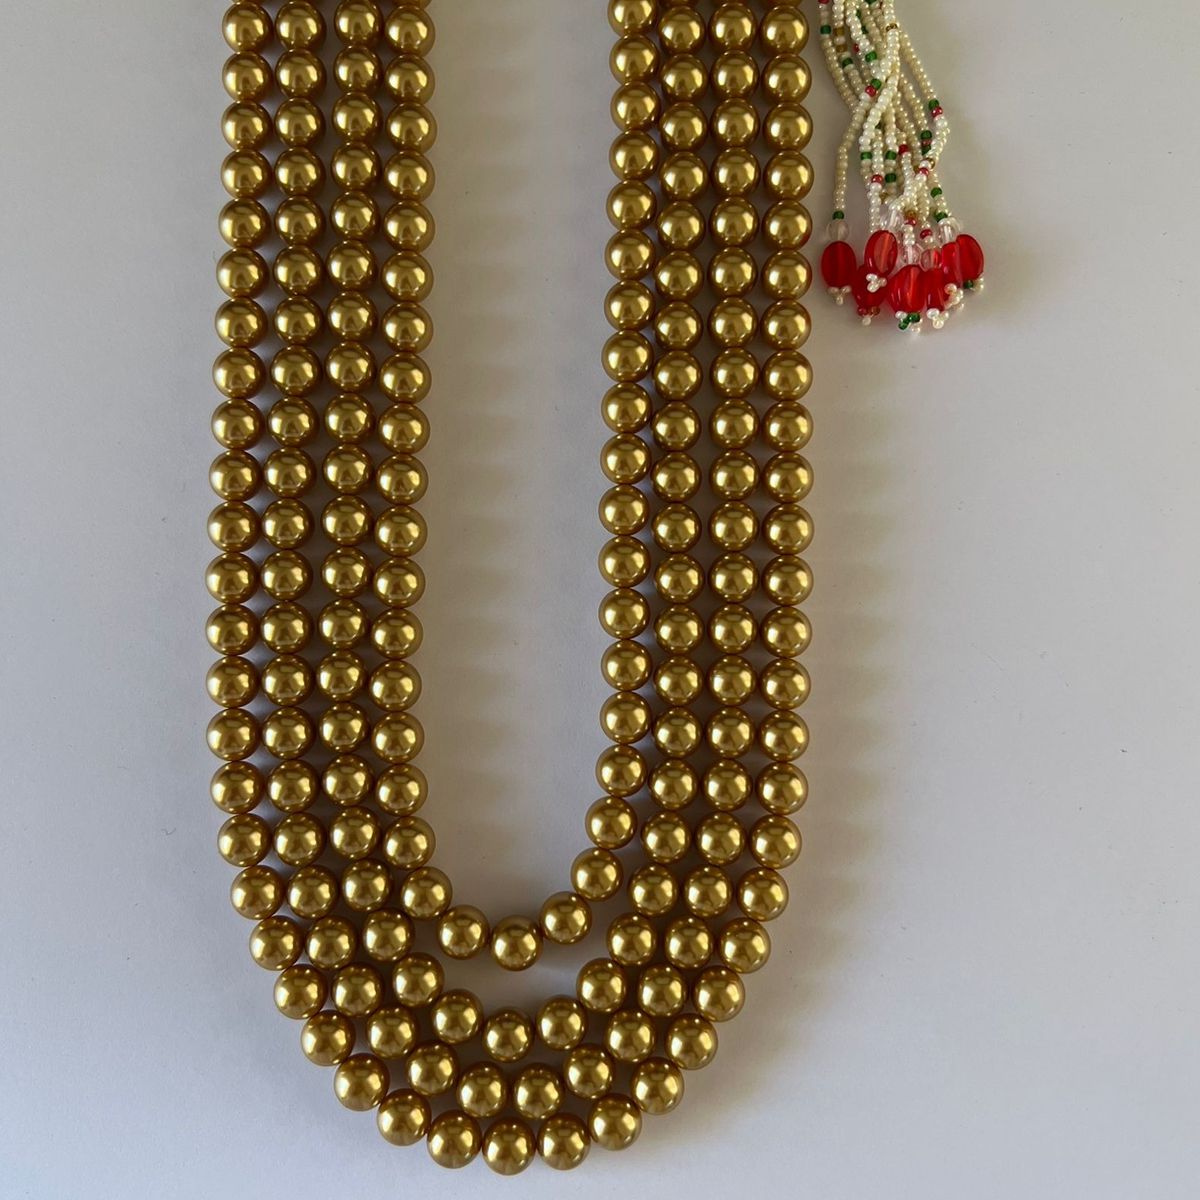 Antique Gold Shell Pearl Mala